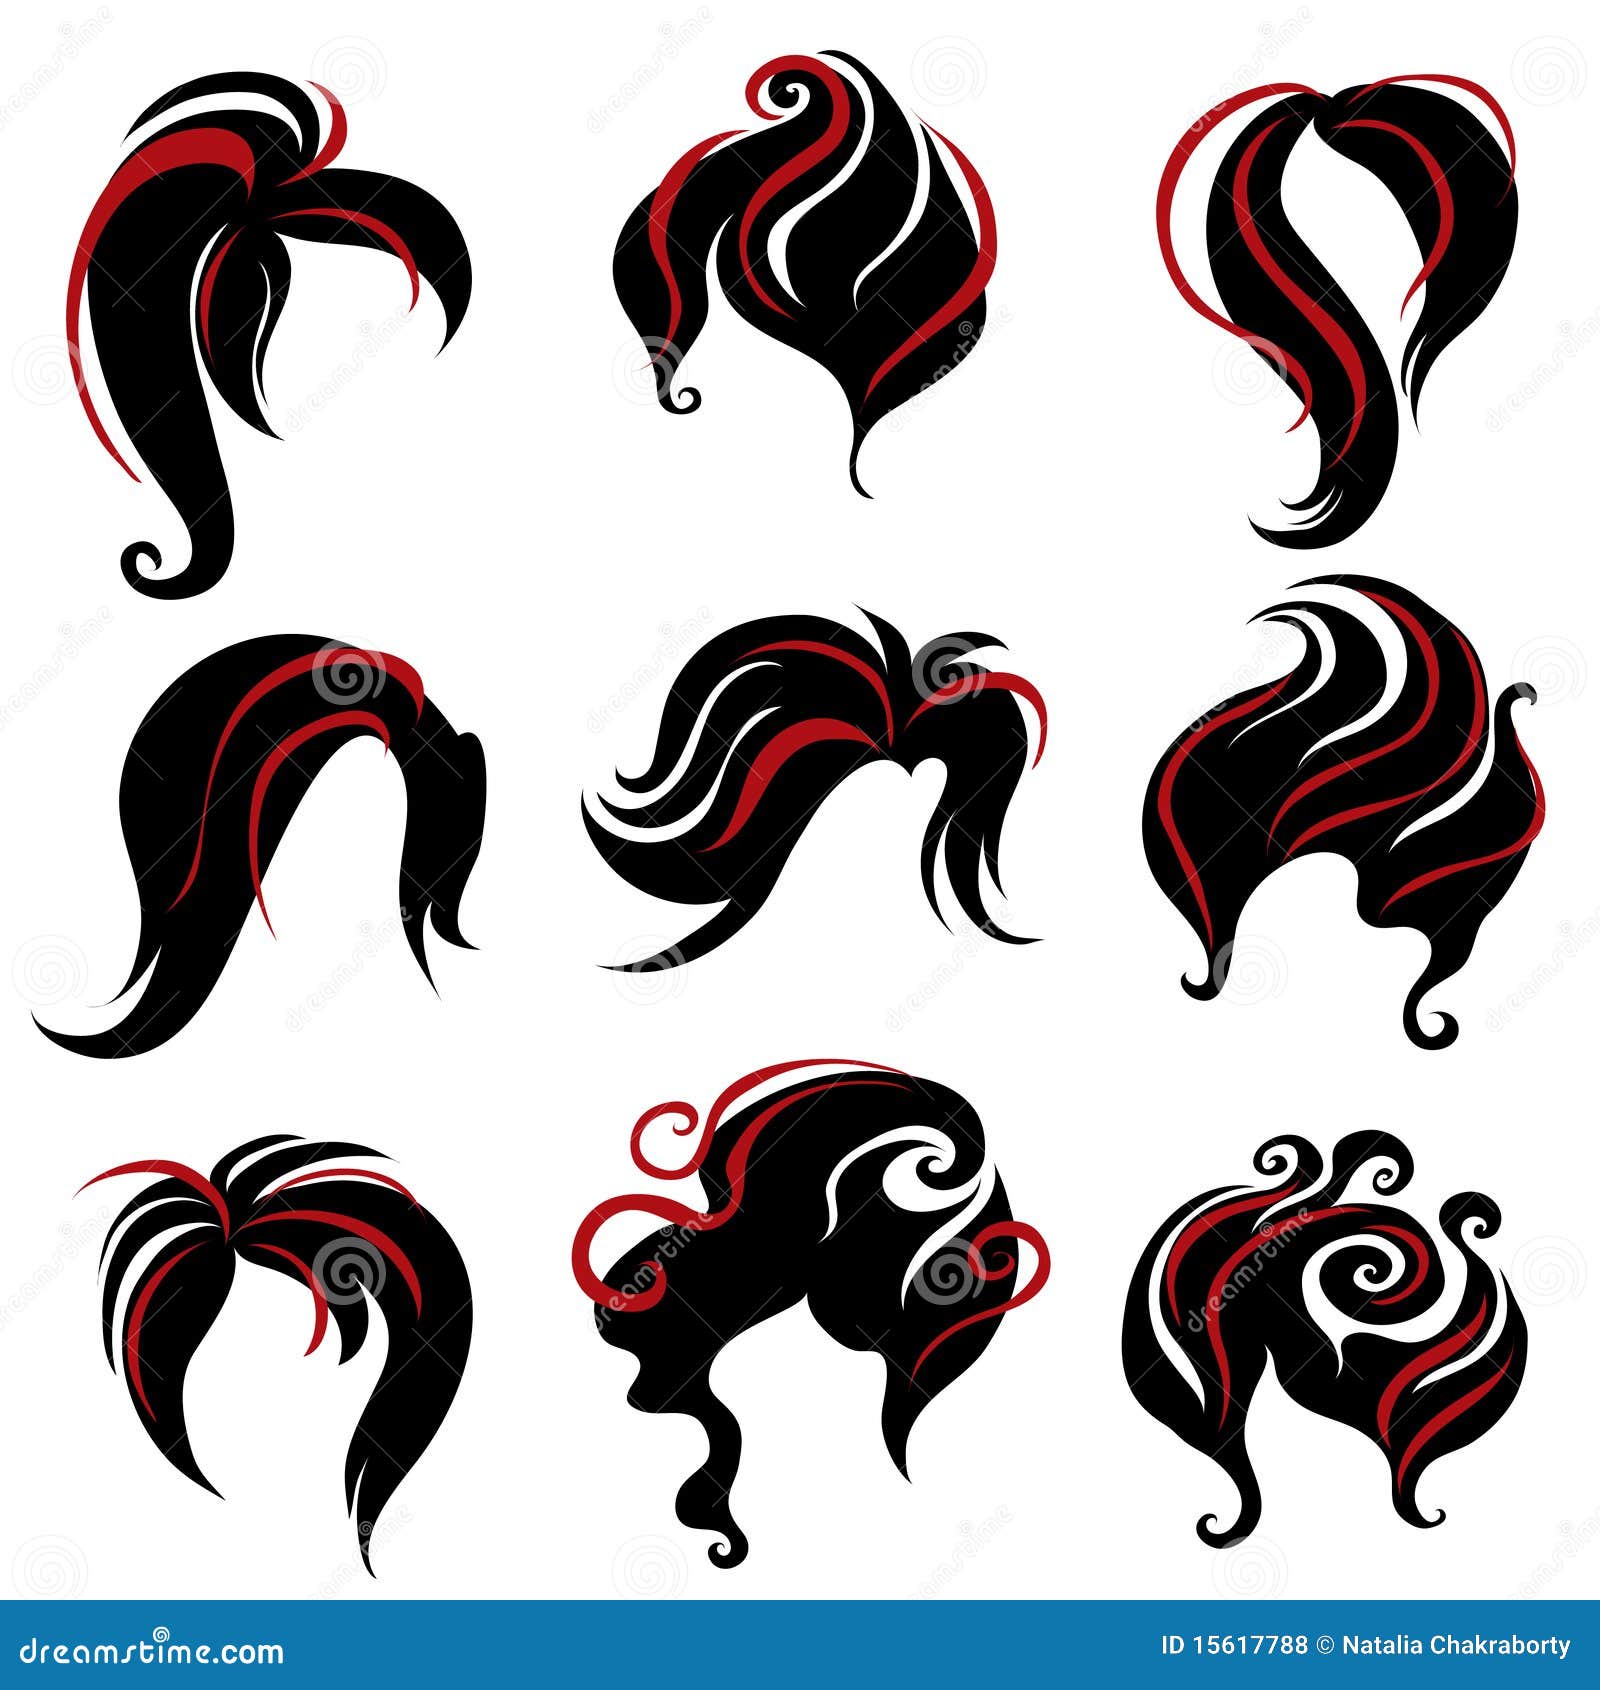 Big Set Of Black Hair Styling For Woman Royalty Free Stock Photos